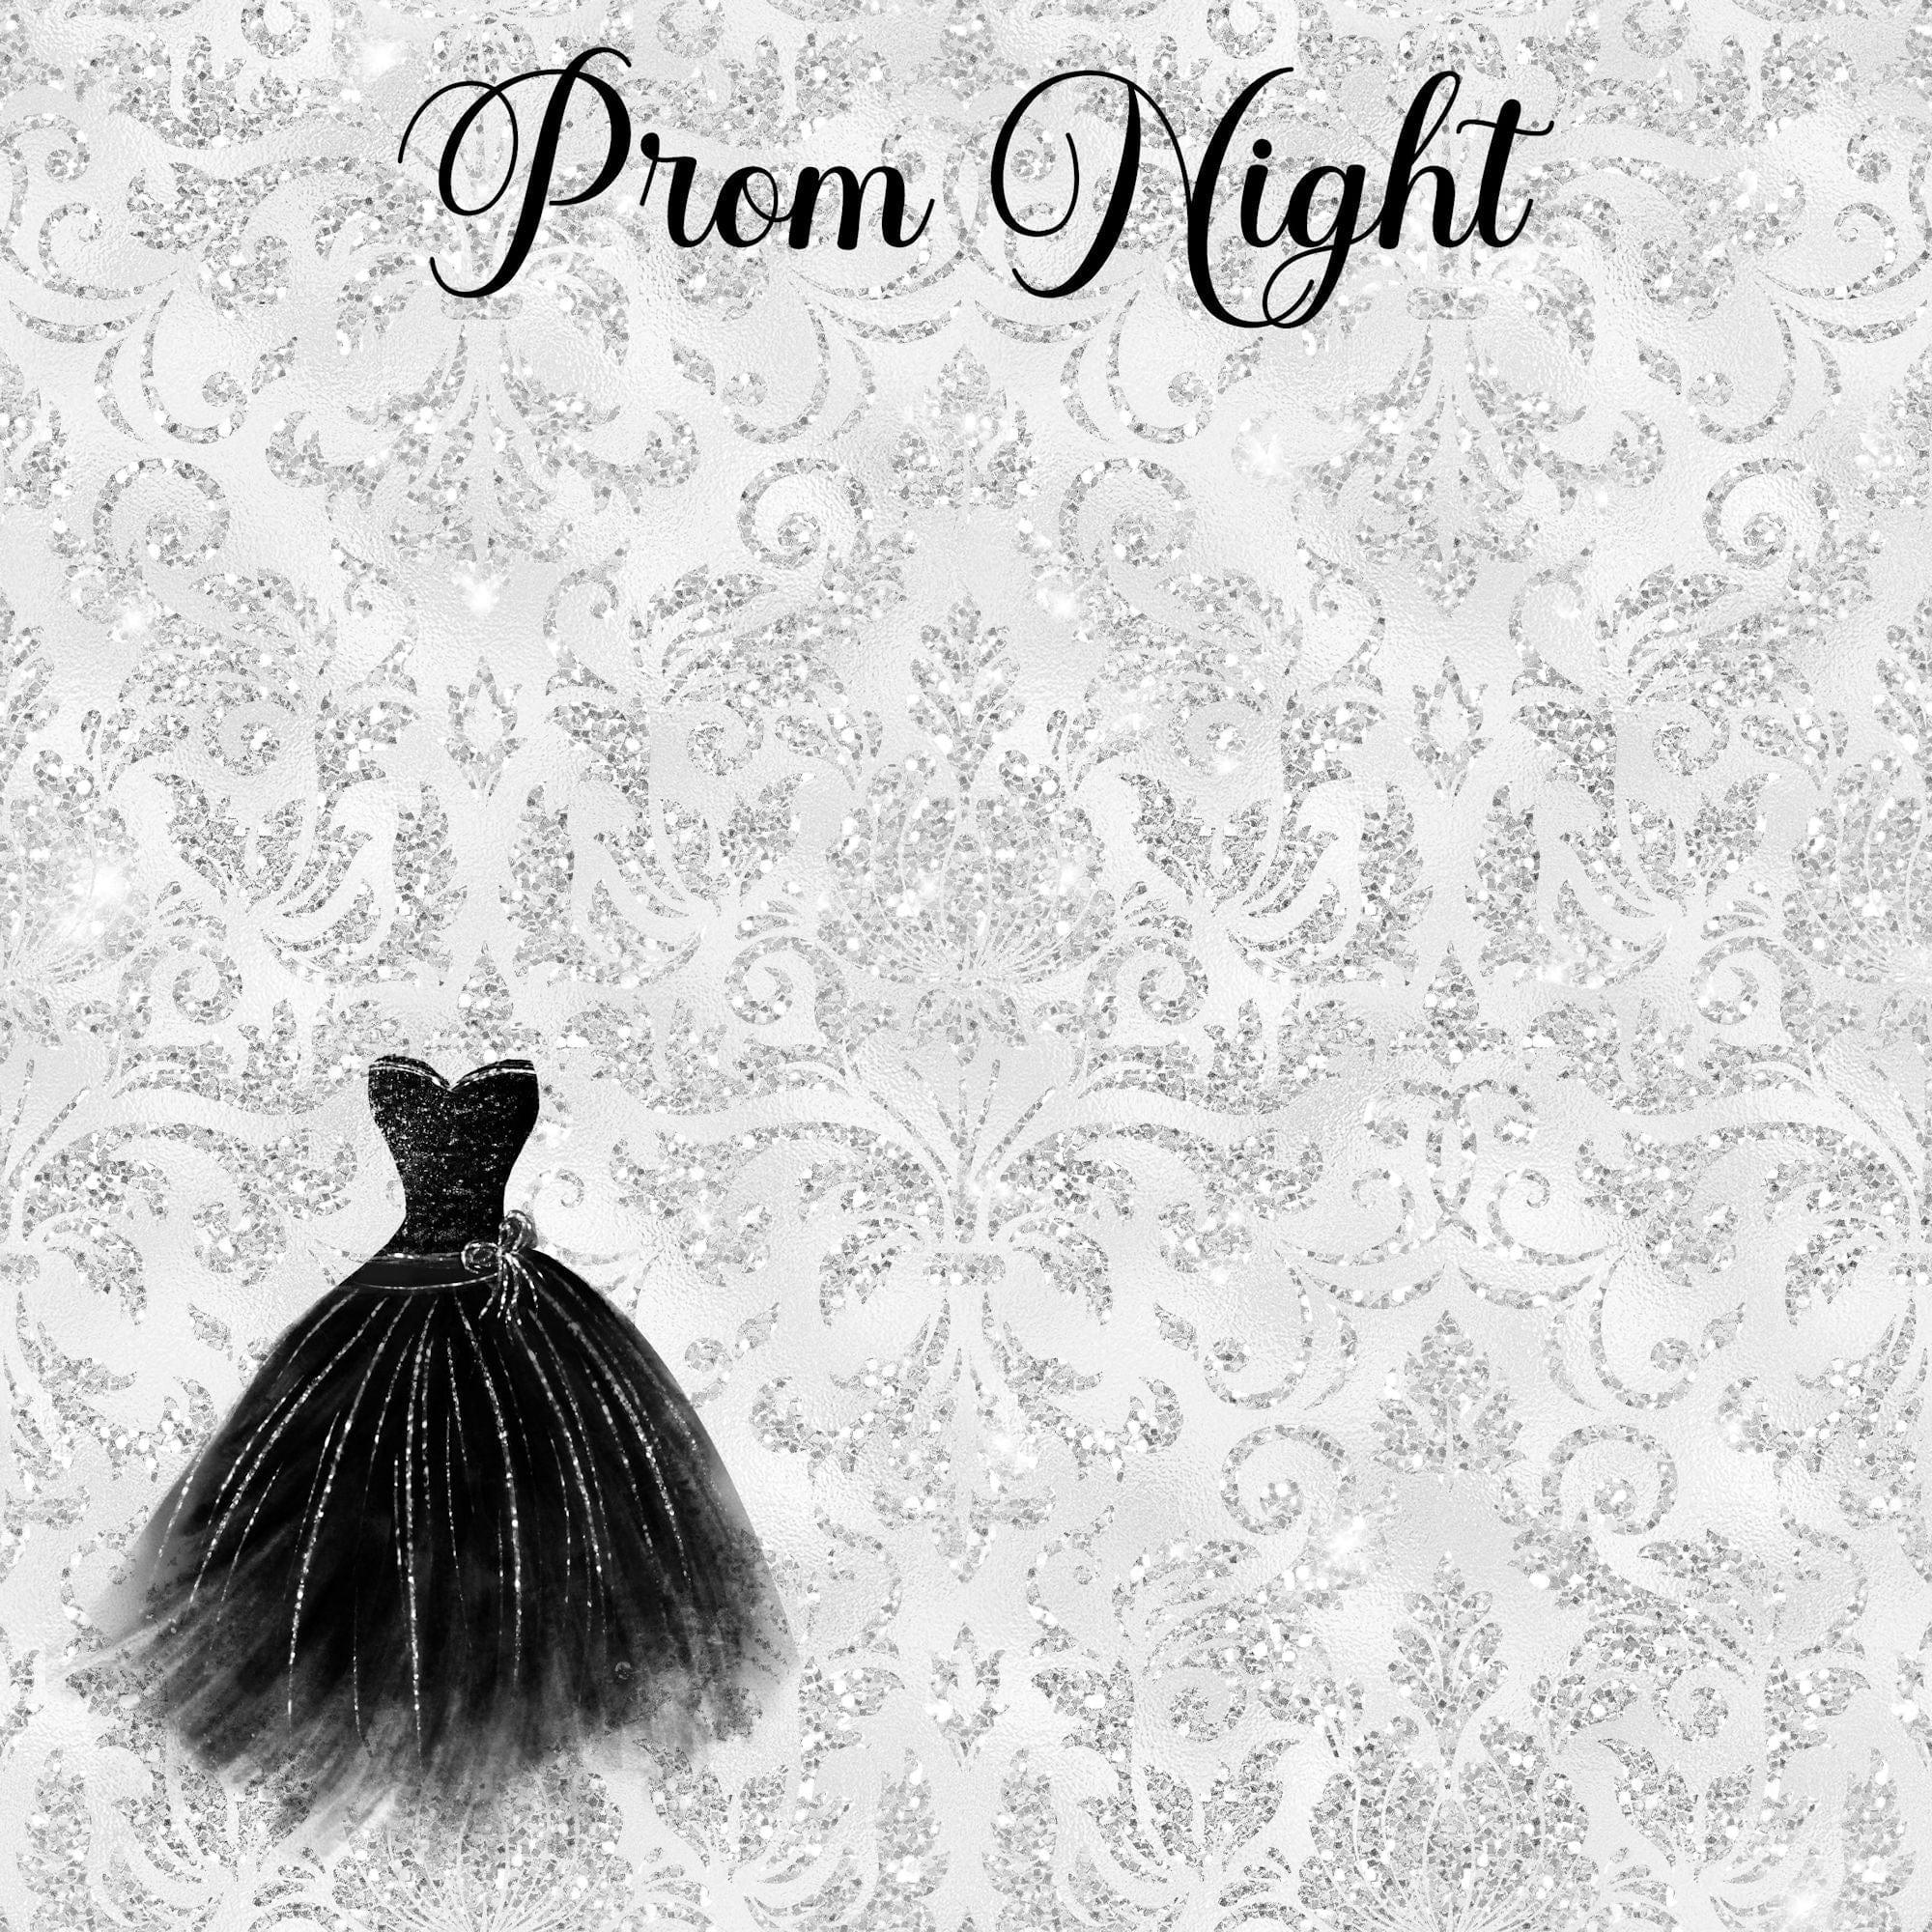 Prom Night Collection Formal Affair 12 x 12 Double-Sided Scrapbook Paper by SSC Designs - Scrapbook Supply Companies